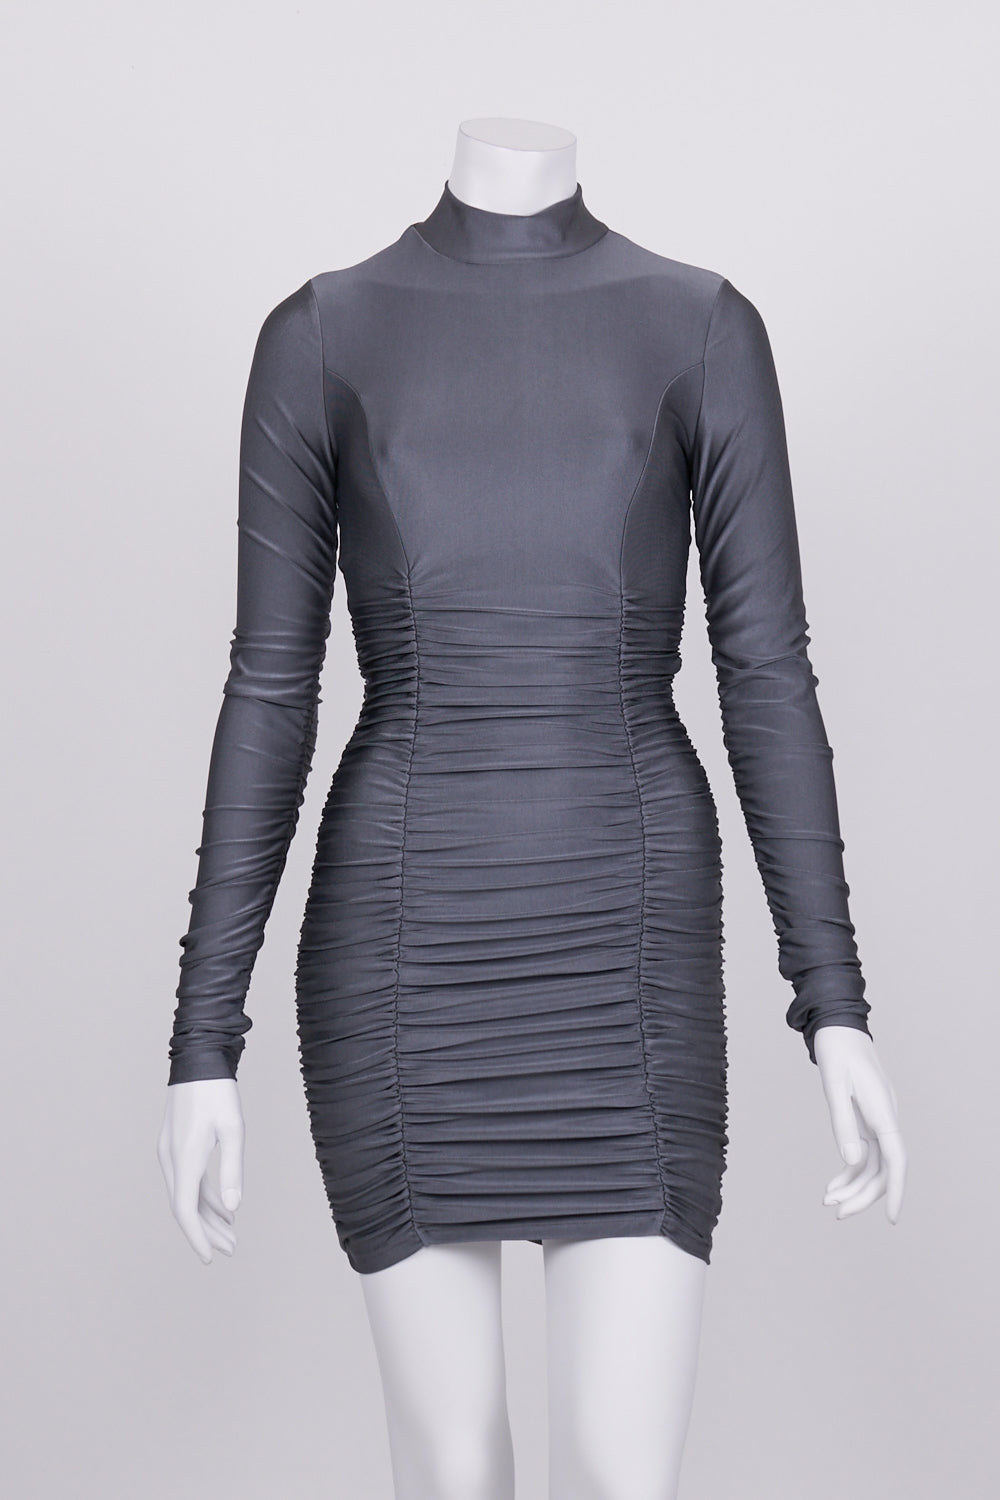 Tiger Mist Grey Ruched Bodycon Dress S